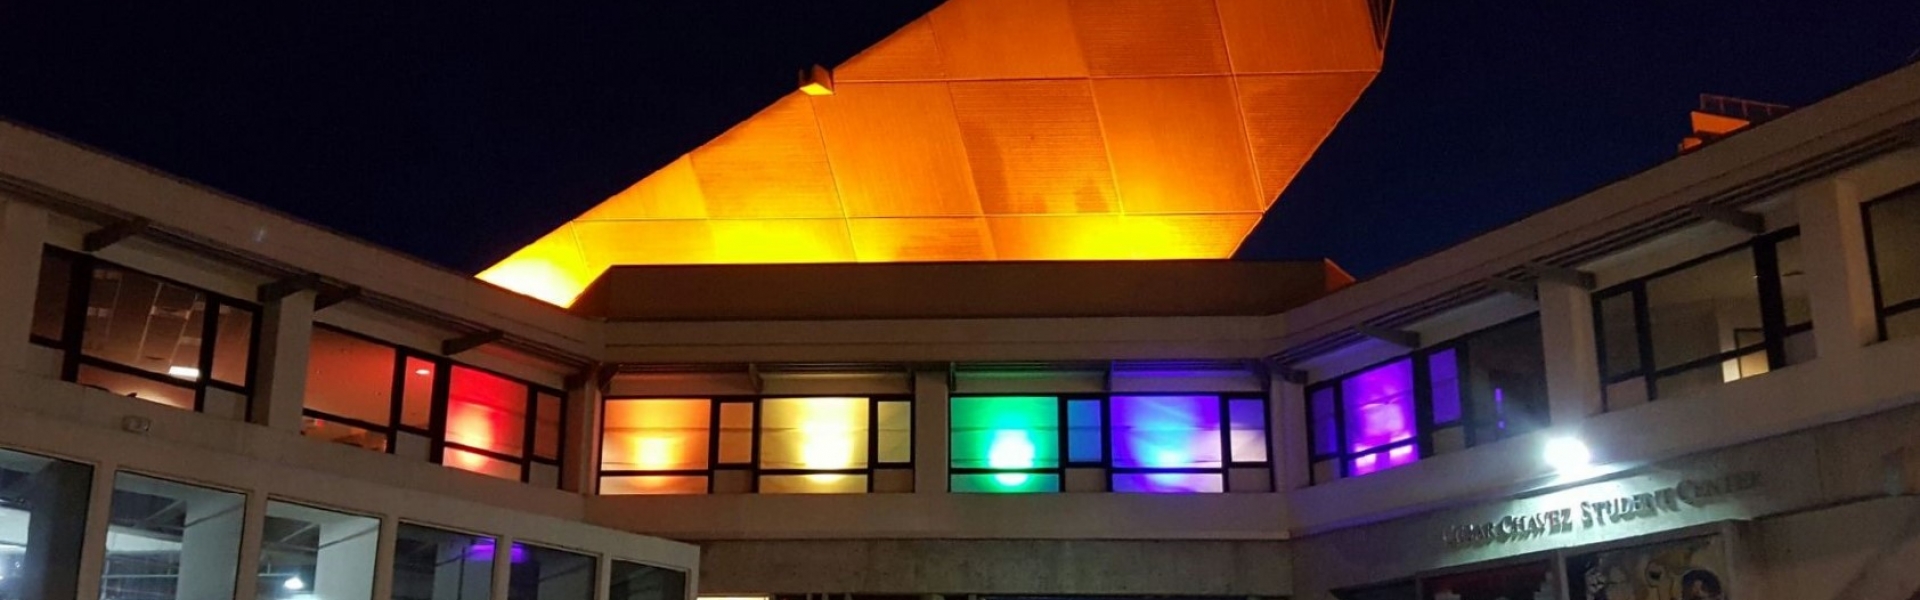 Cesar Chavez Student Center with rainbow lights in the windows